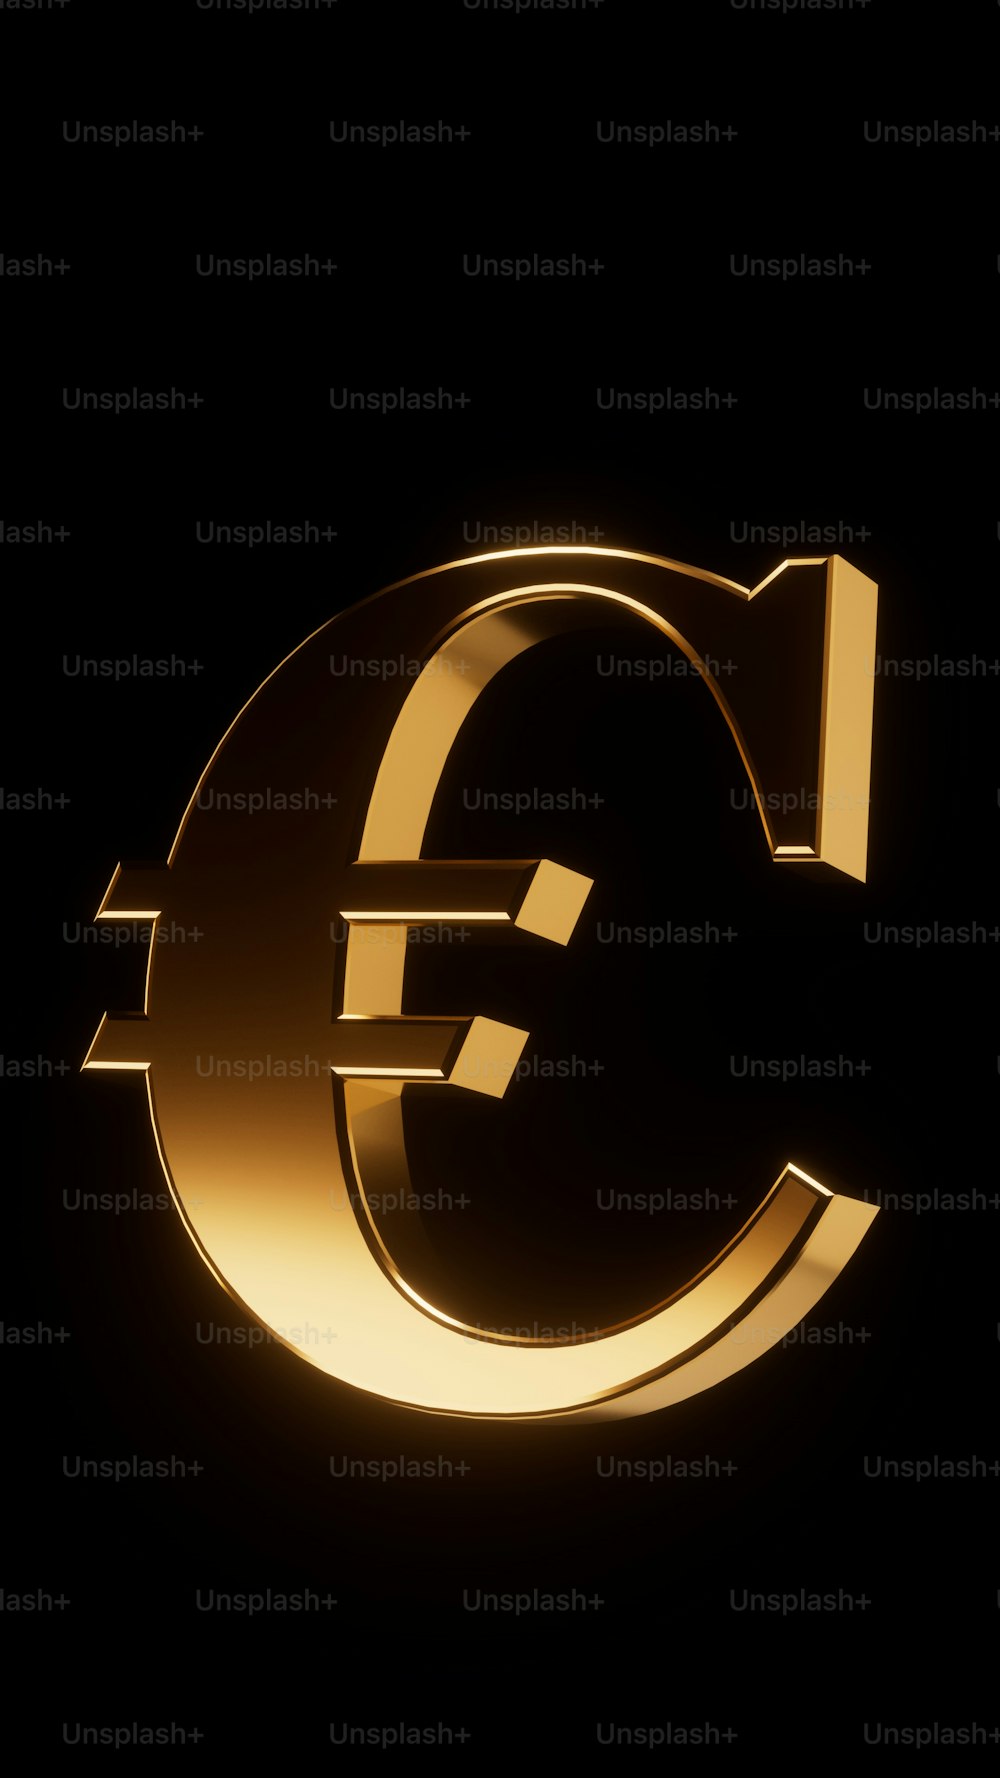 a gold letter g on a black background